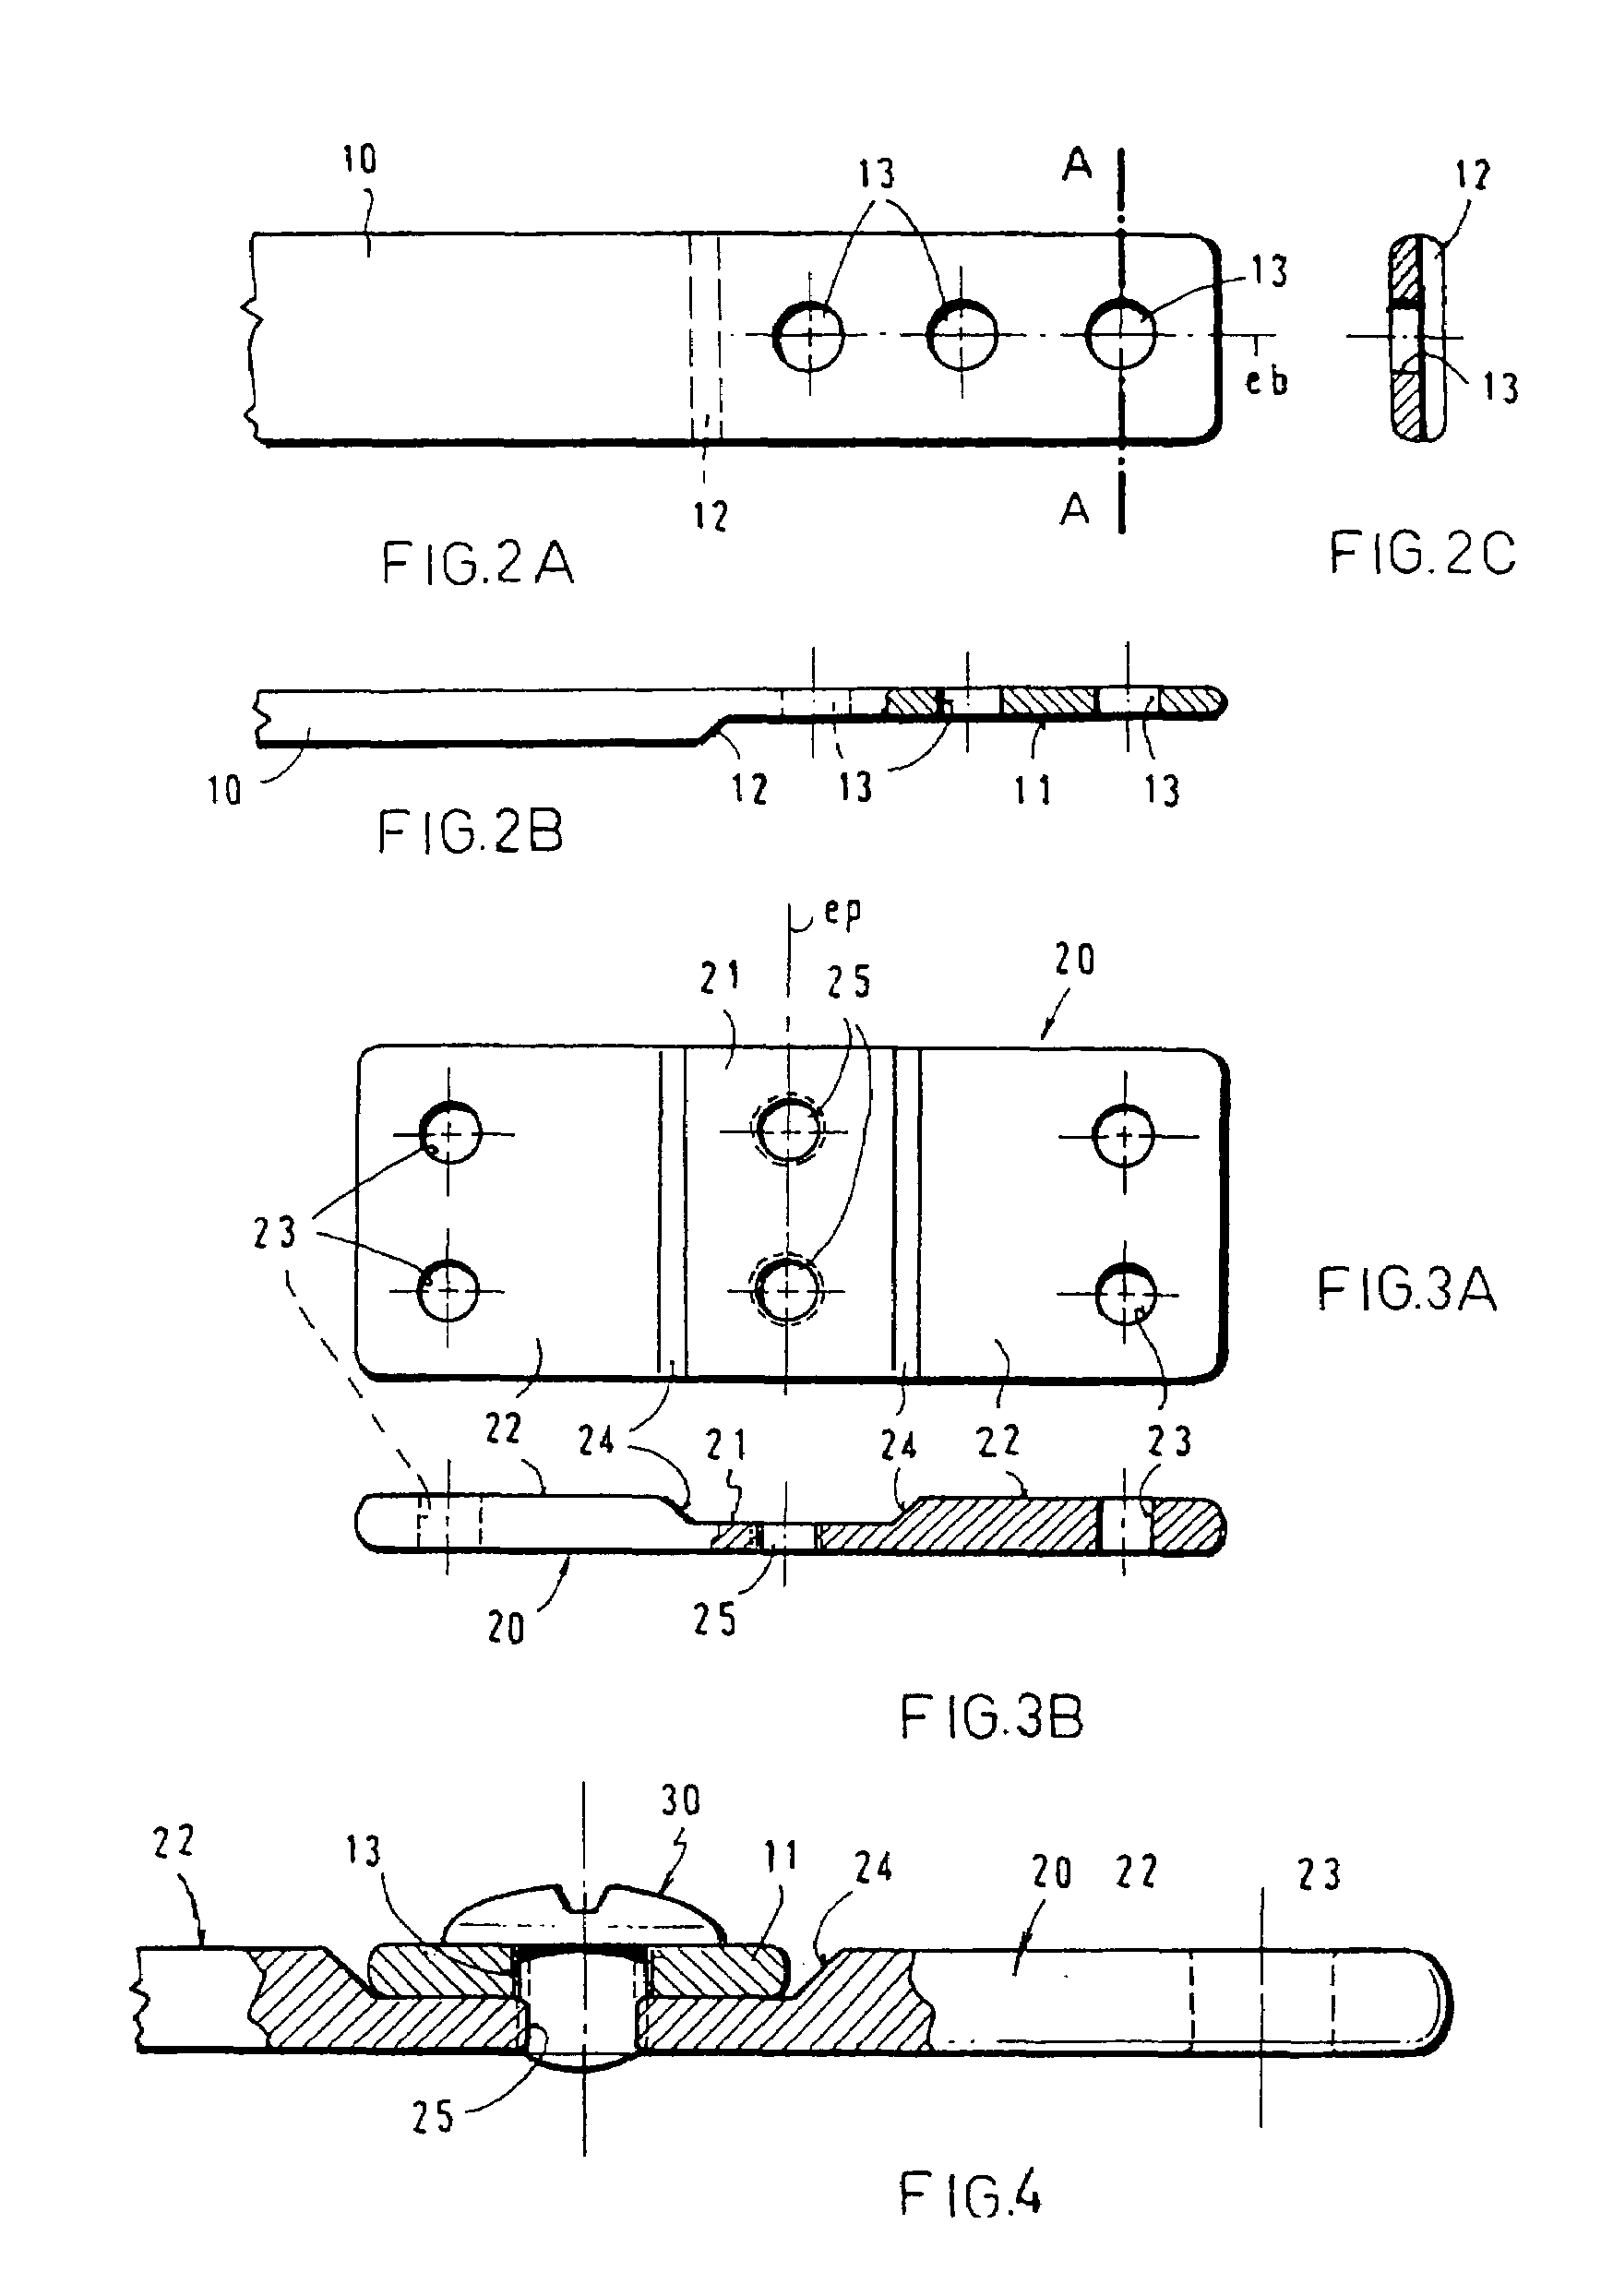 Apparatus for the correction of chest wall deformities such as Pectus Carinatum and method of using the same